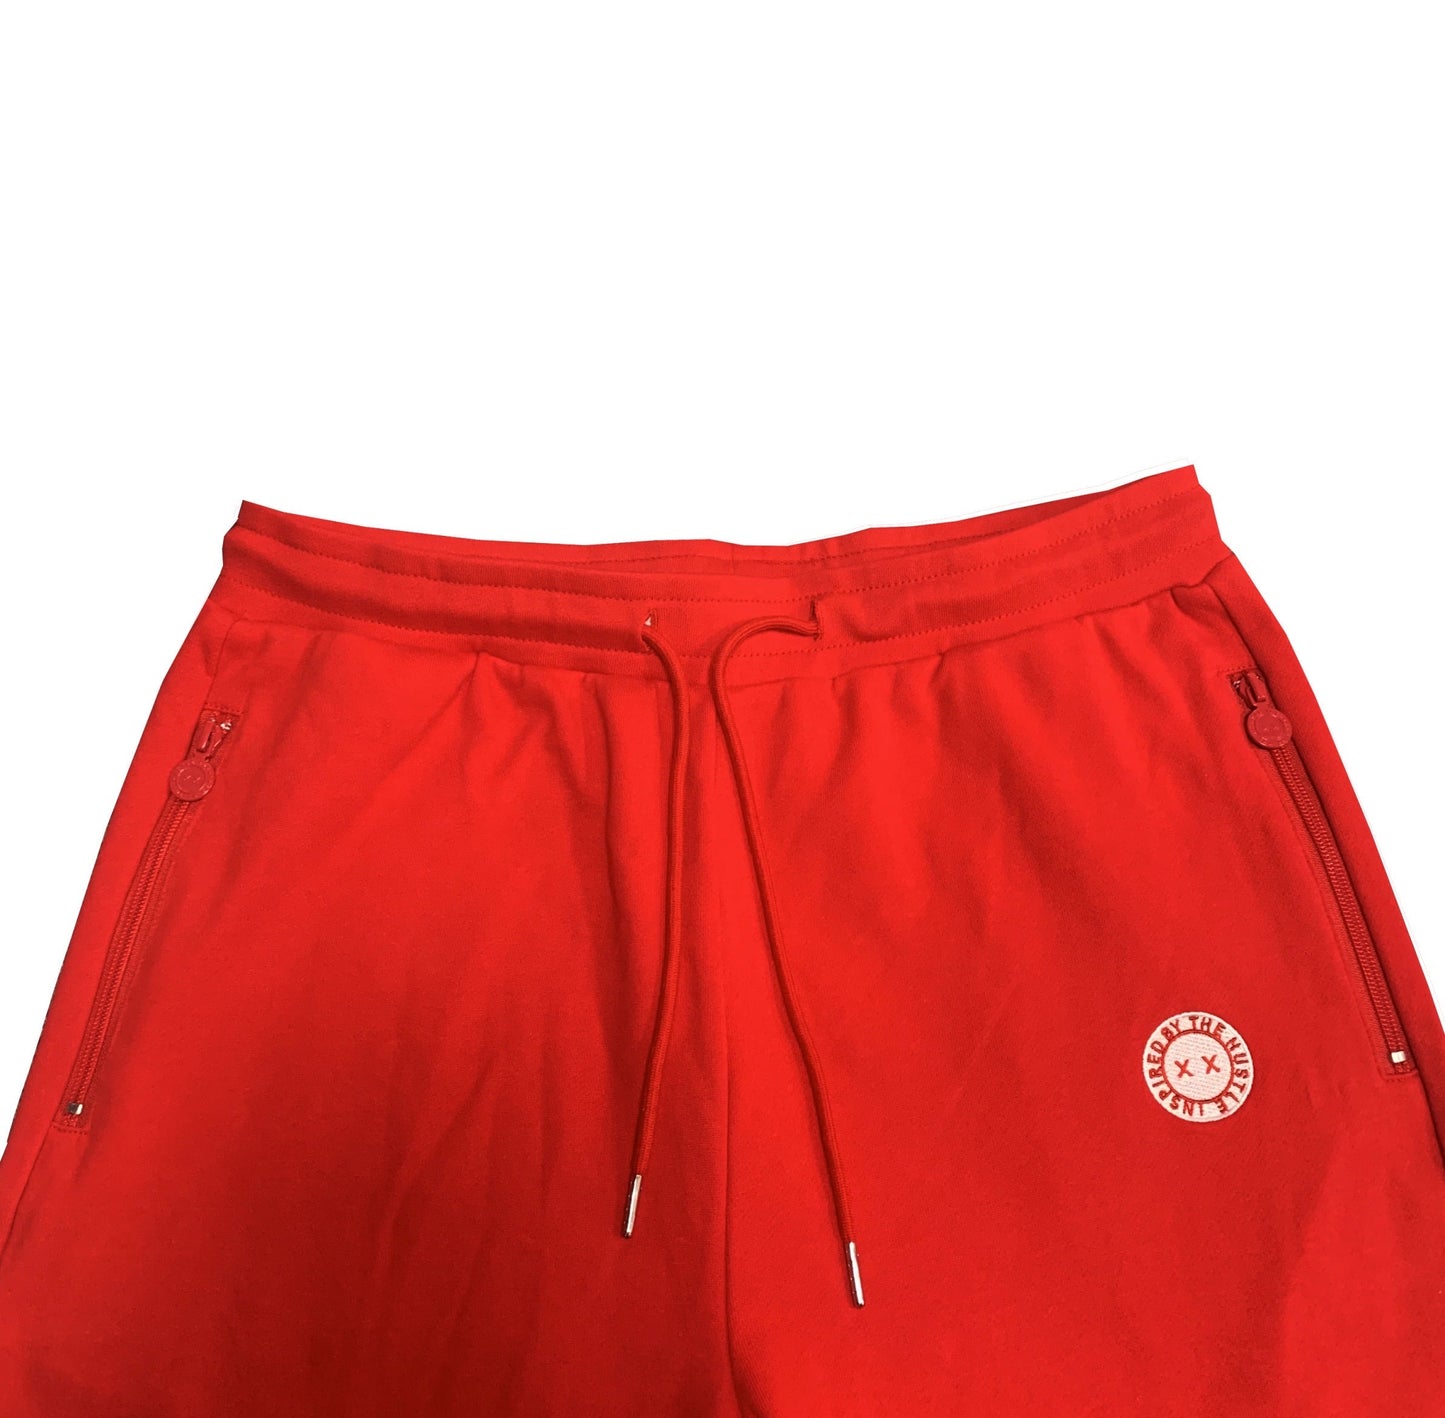 Embroidered Inspired Cotton Shorts Red/White*